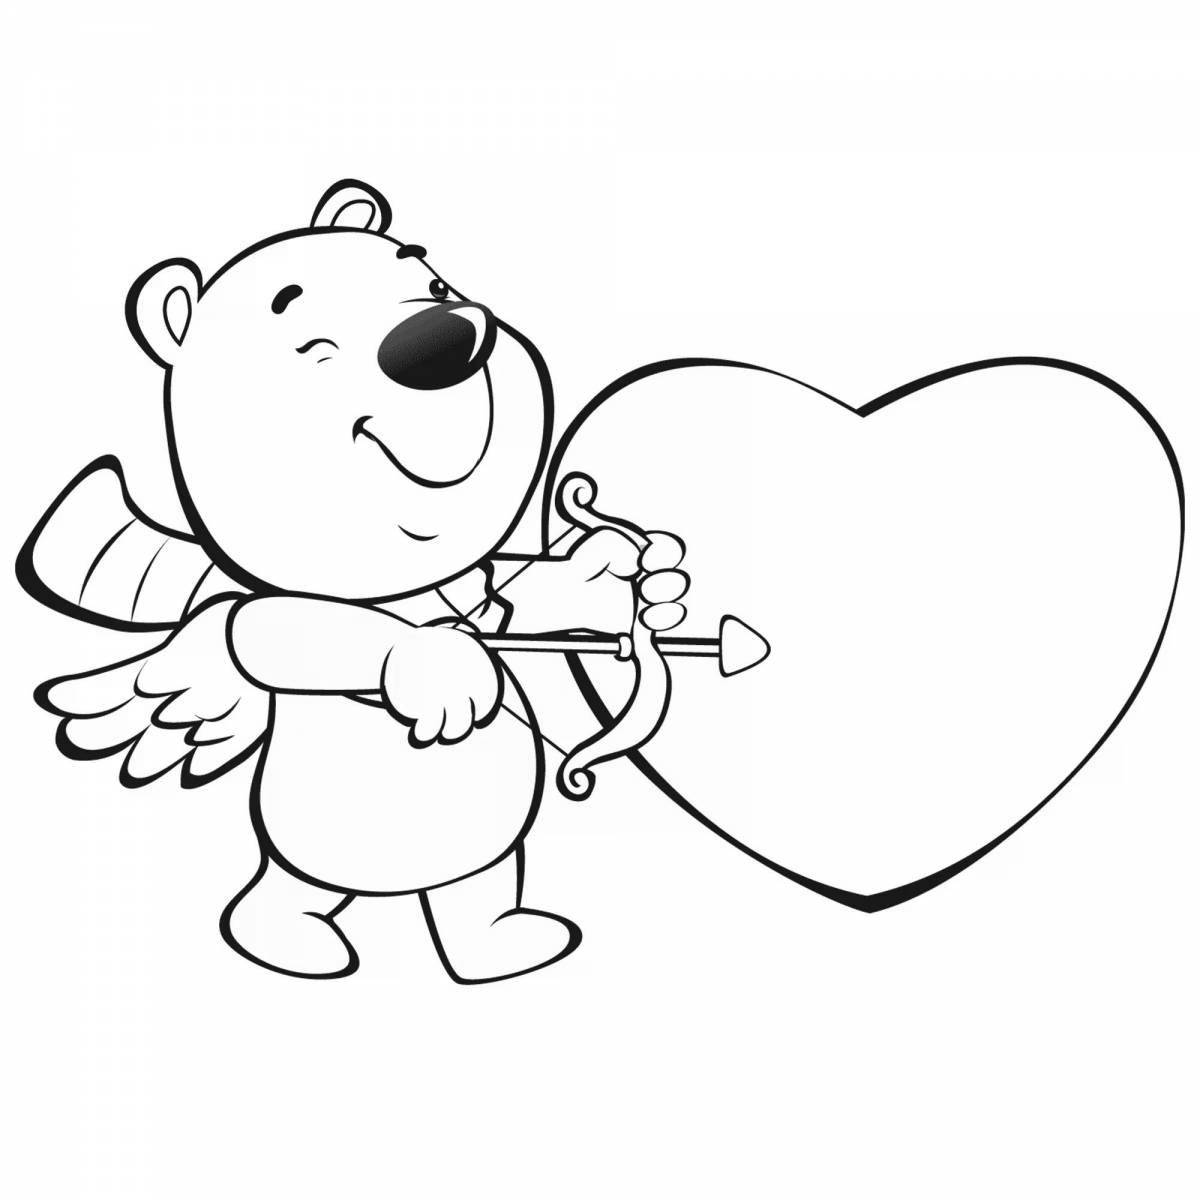 Coloring page joyful February 14th